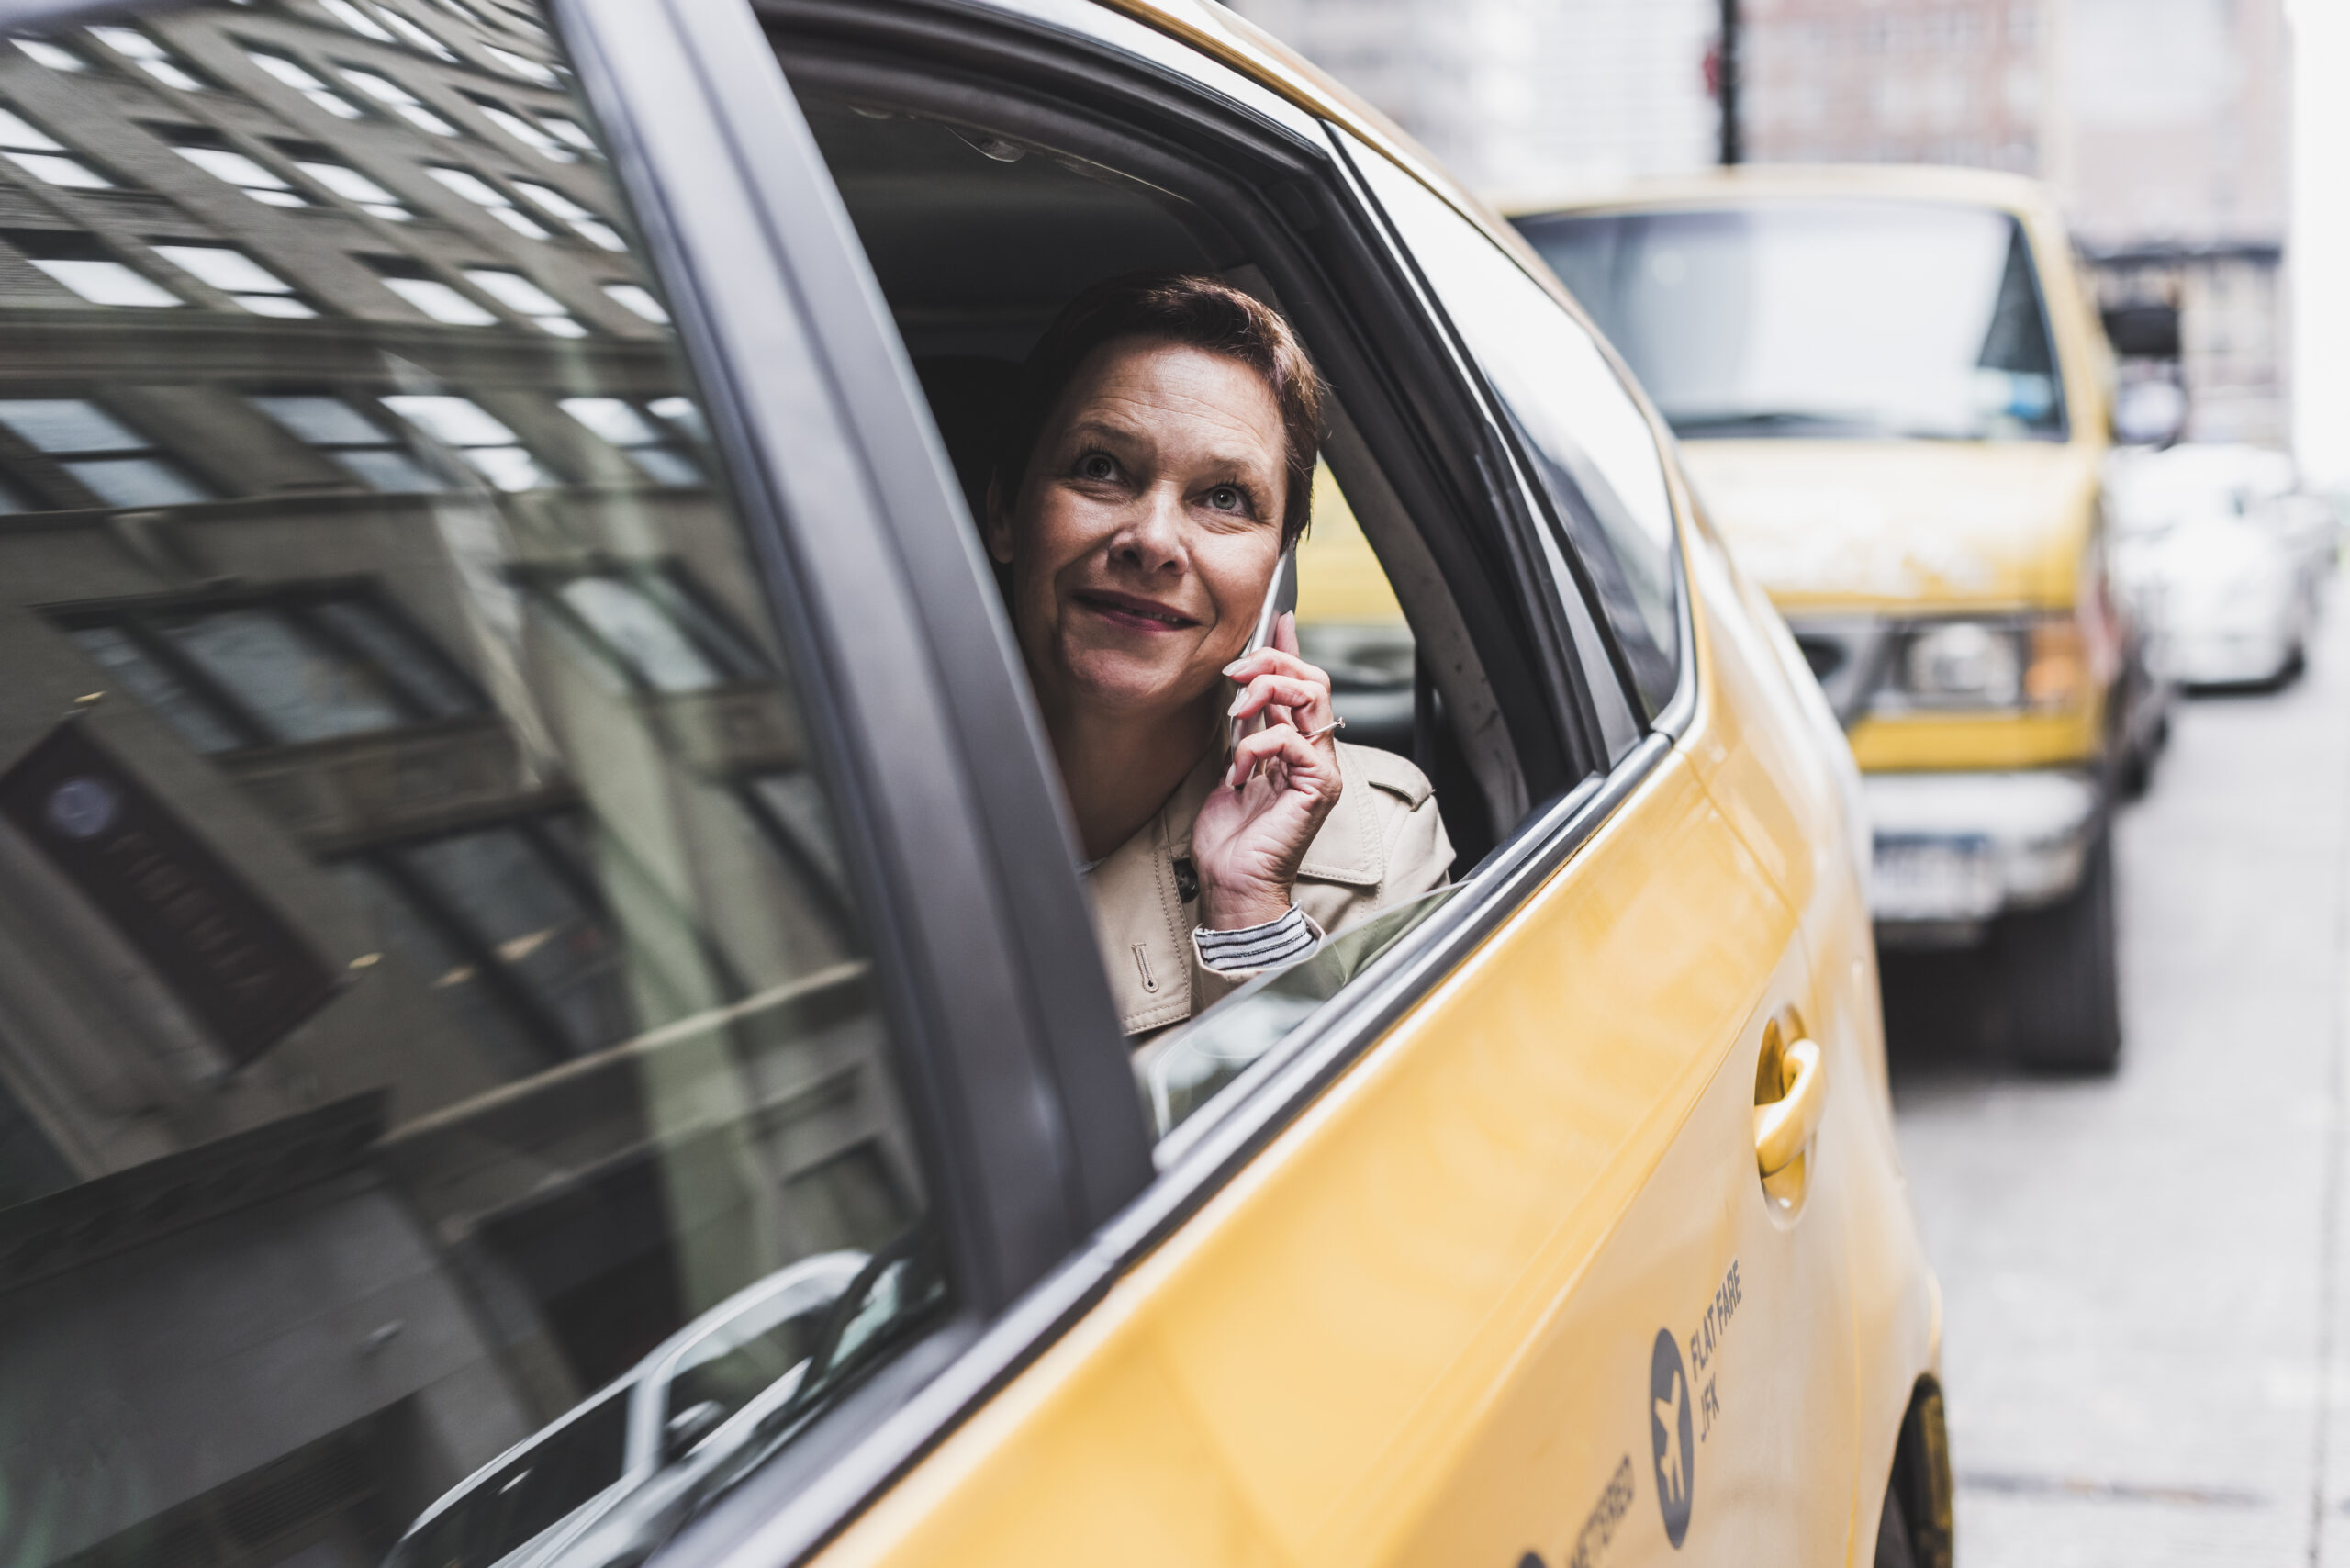 USA, New York City, smiling woman in taxi on cell phone